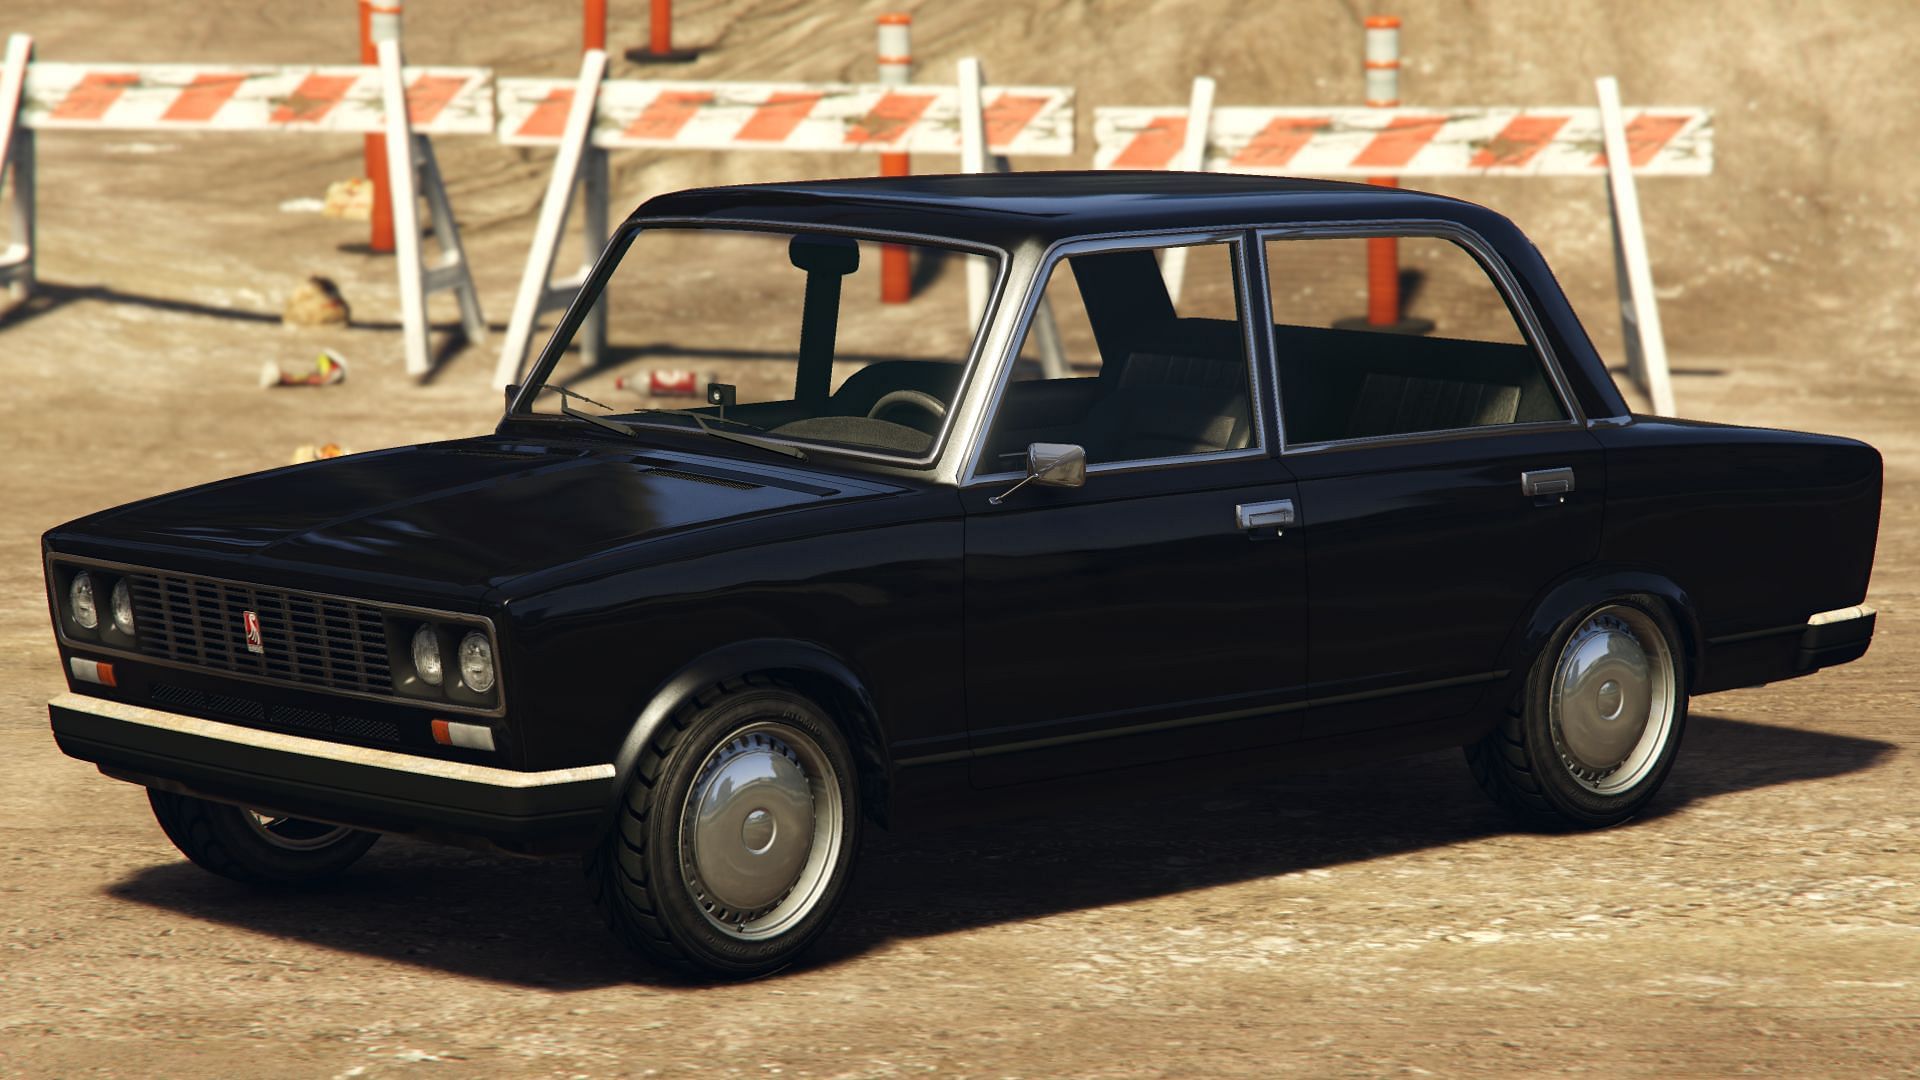 This is what the car looks like without any modifications or liveries (Image via Rockstar Games)